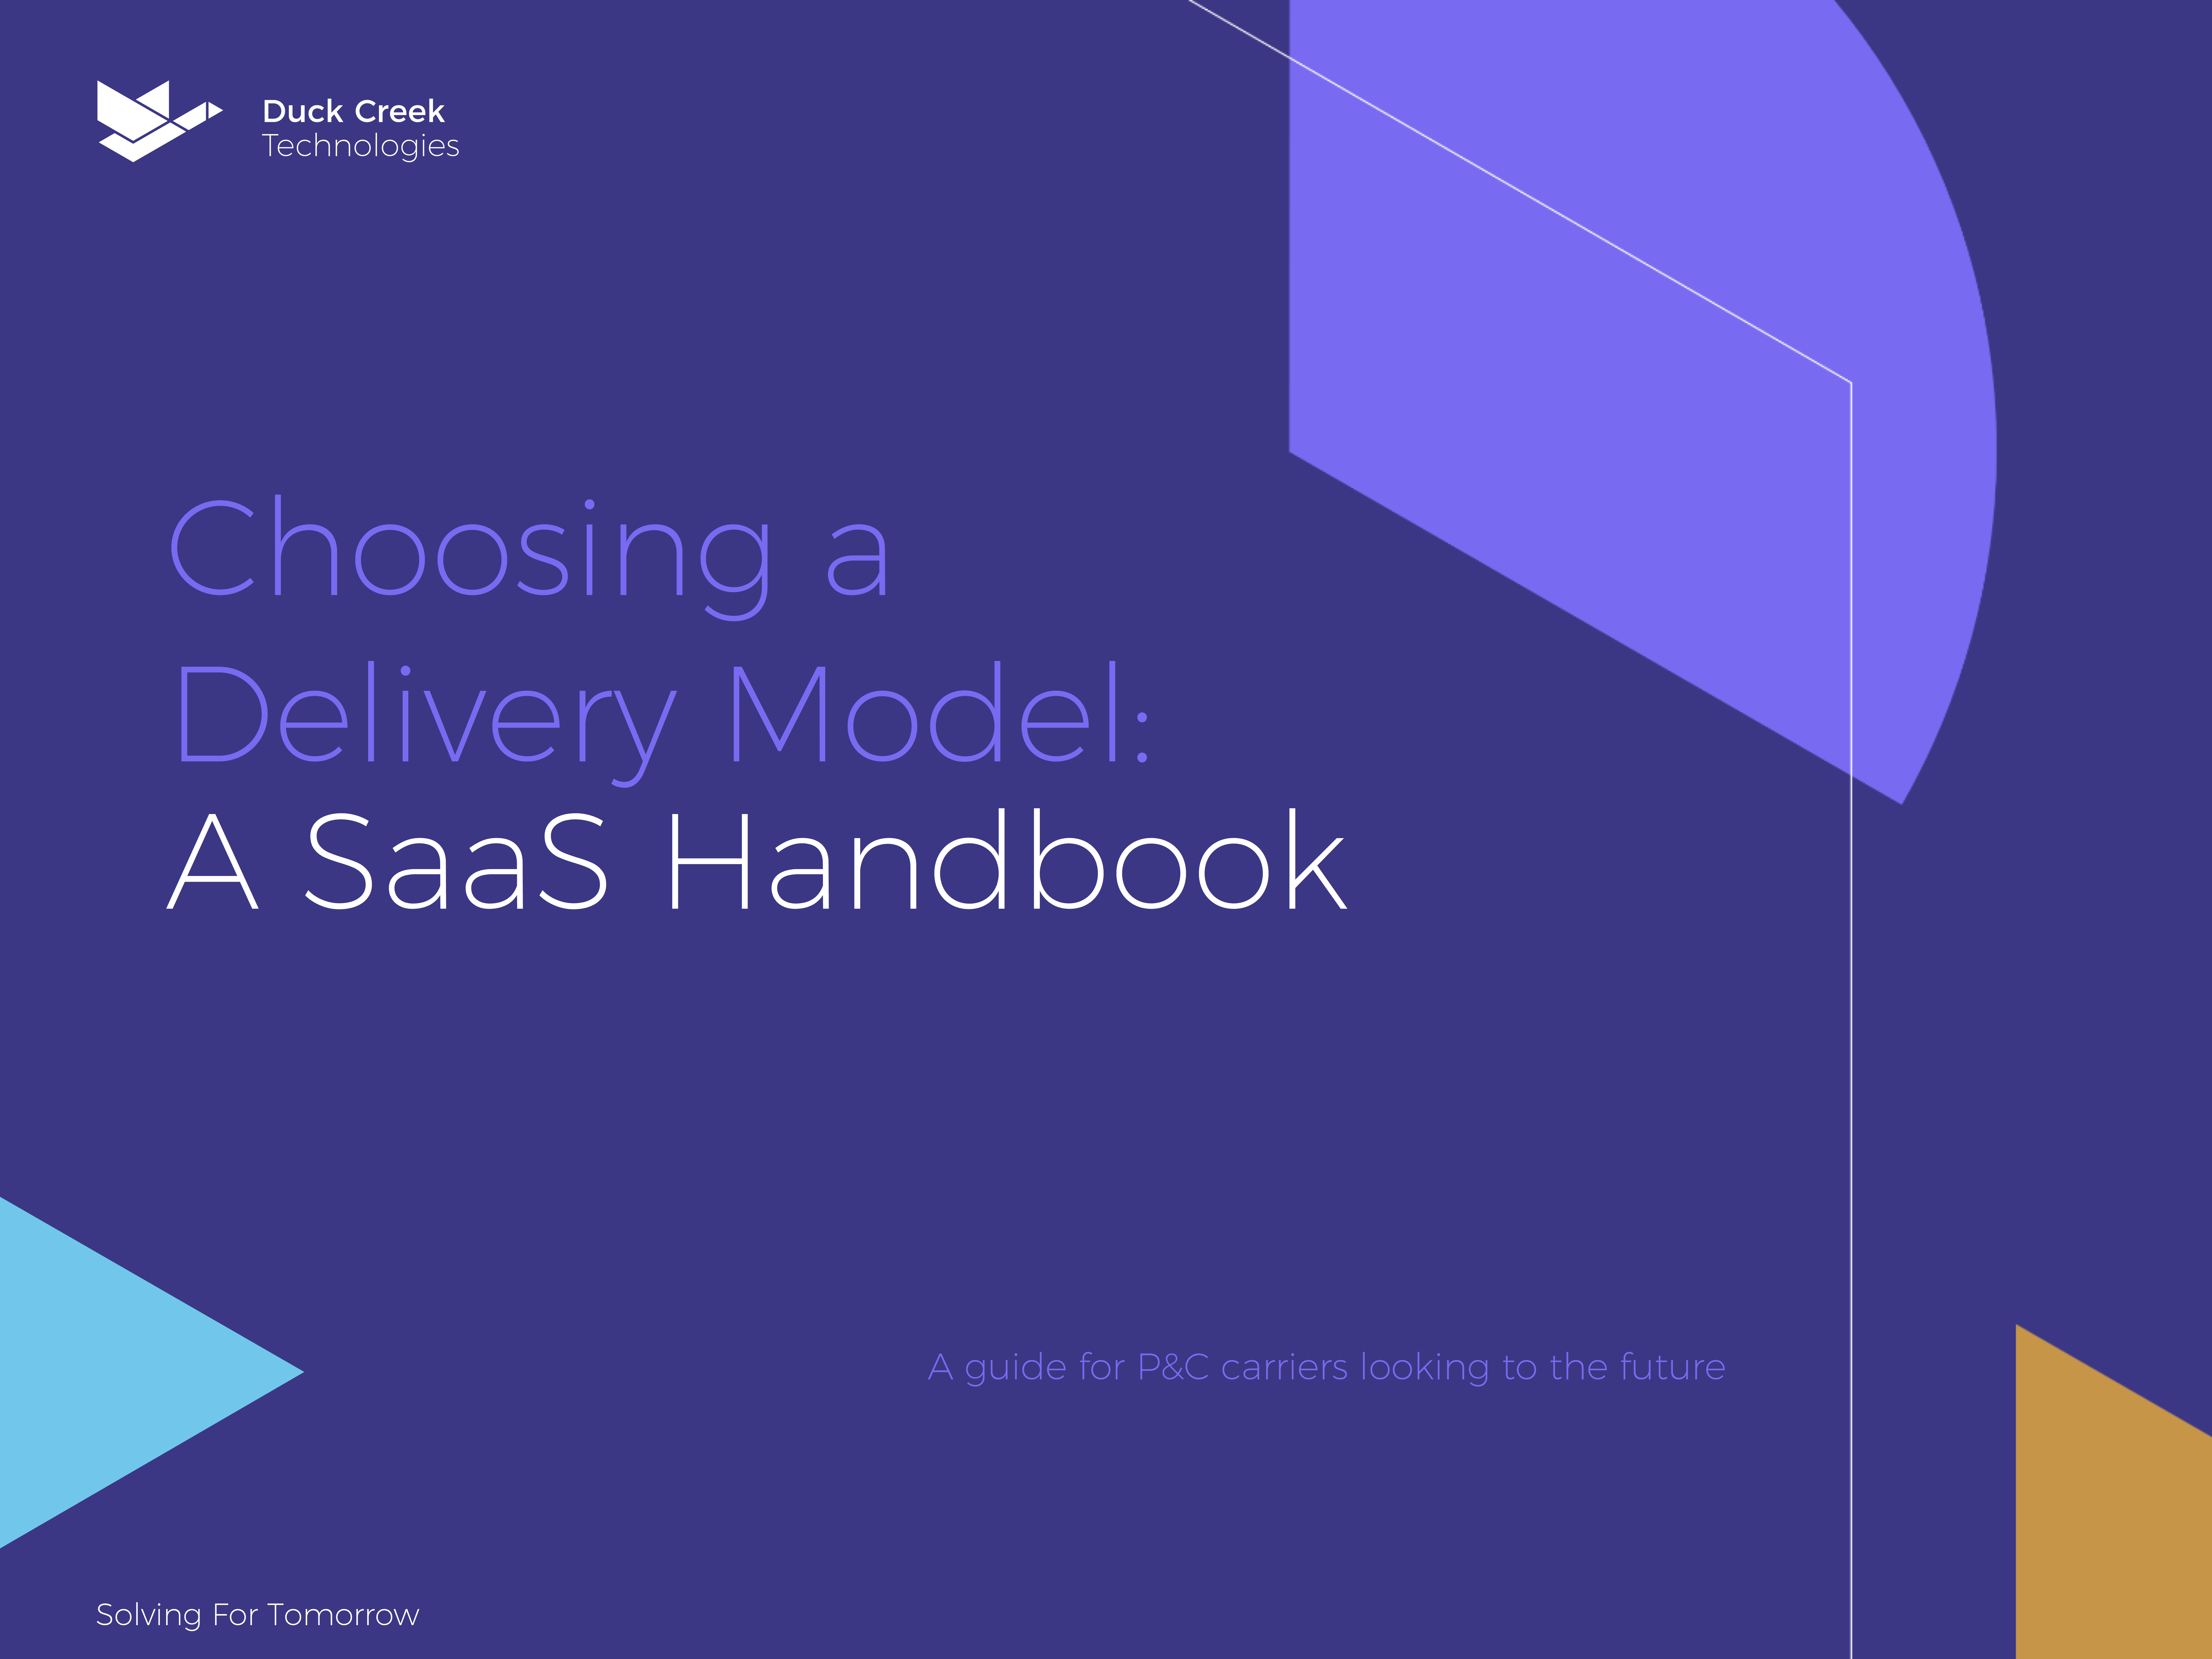 Choosing a Delivery Model - A SaaS Handbook - Print Edition Cover Image.png